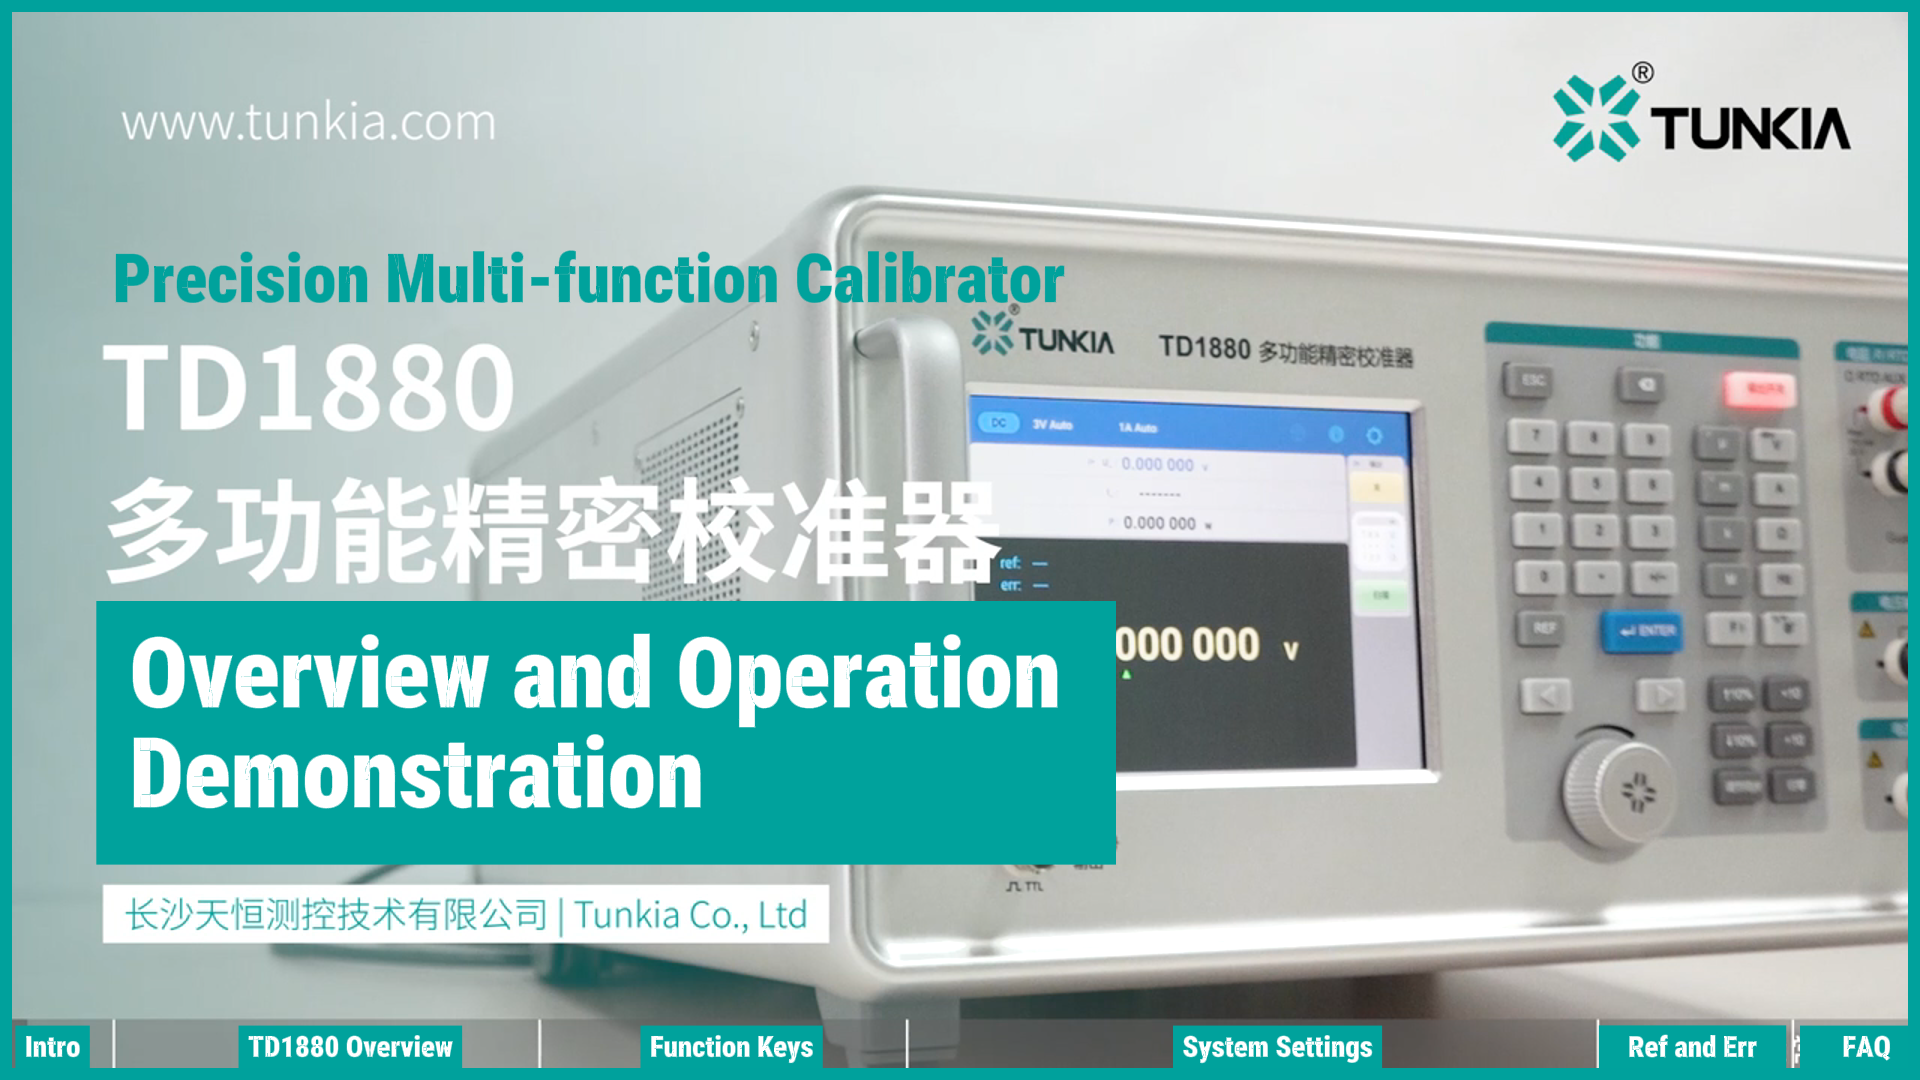 Overview of the TD1880 Multifunction Calibrator - Part 1